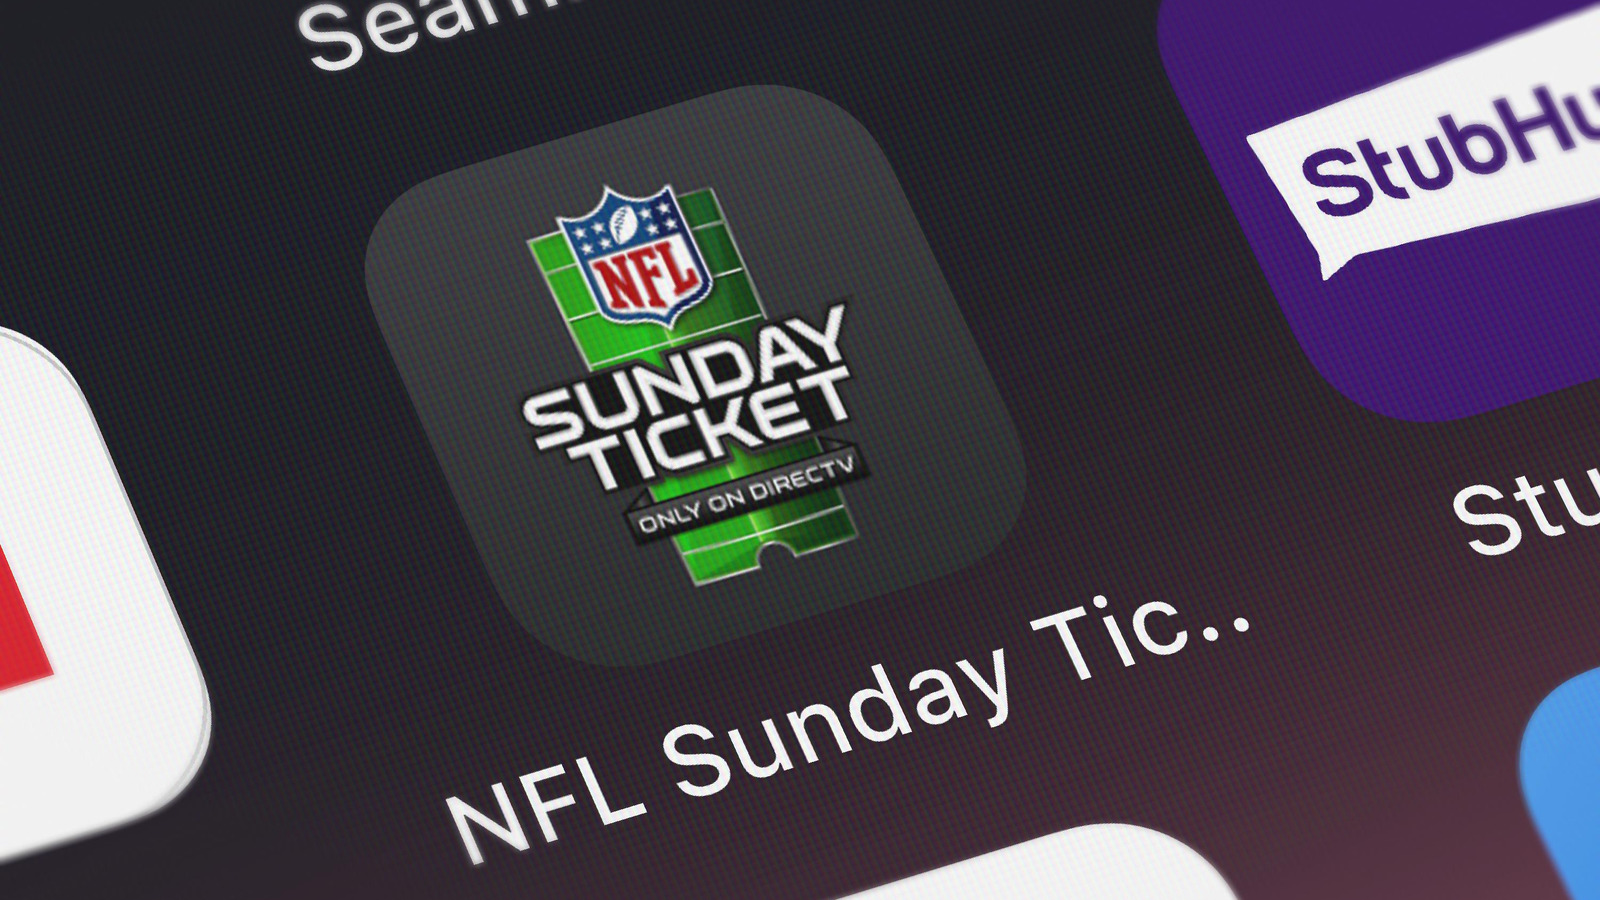 NFL Sunday Ticket:   TV announces how much first season